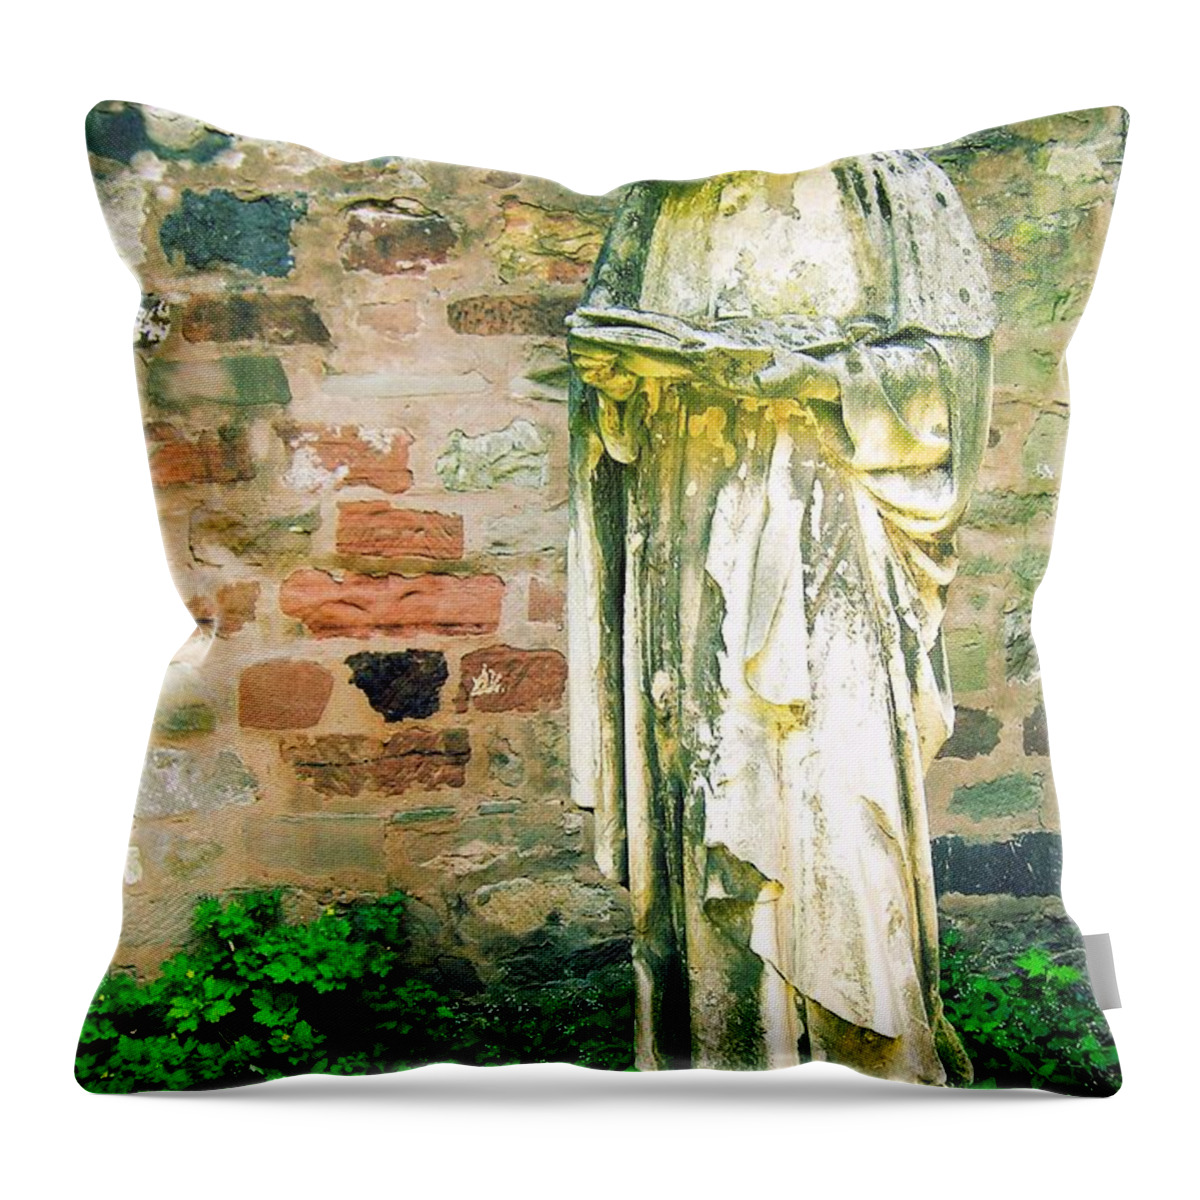 Statues Throw Pillow featuring the digital art Illuminated Reader by Maria Huntley